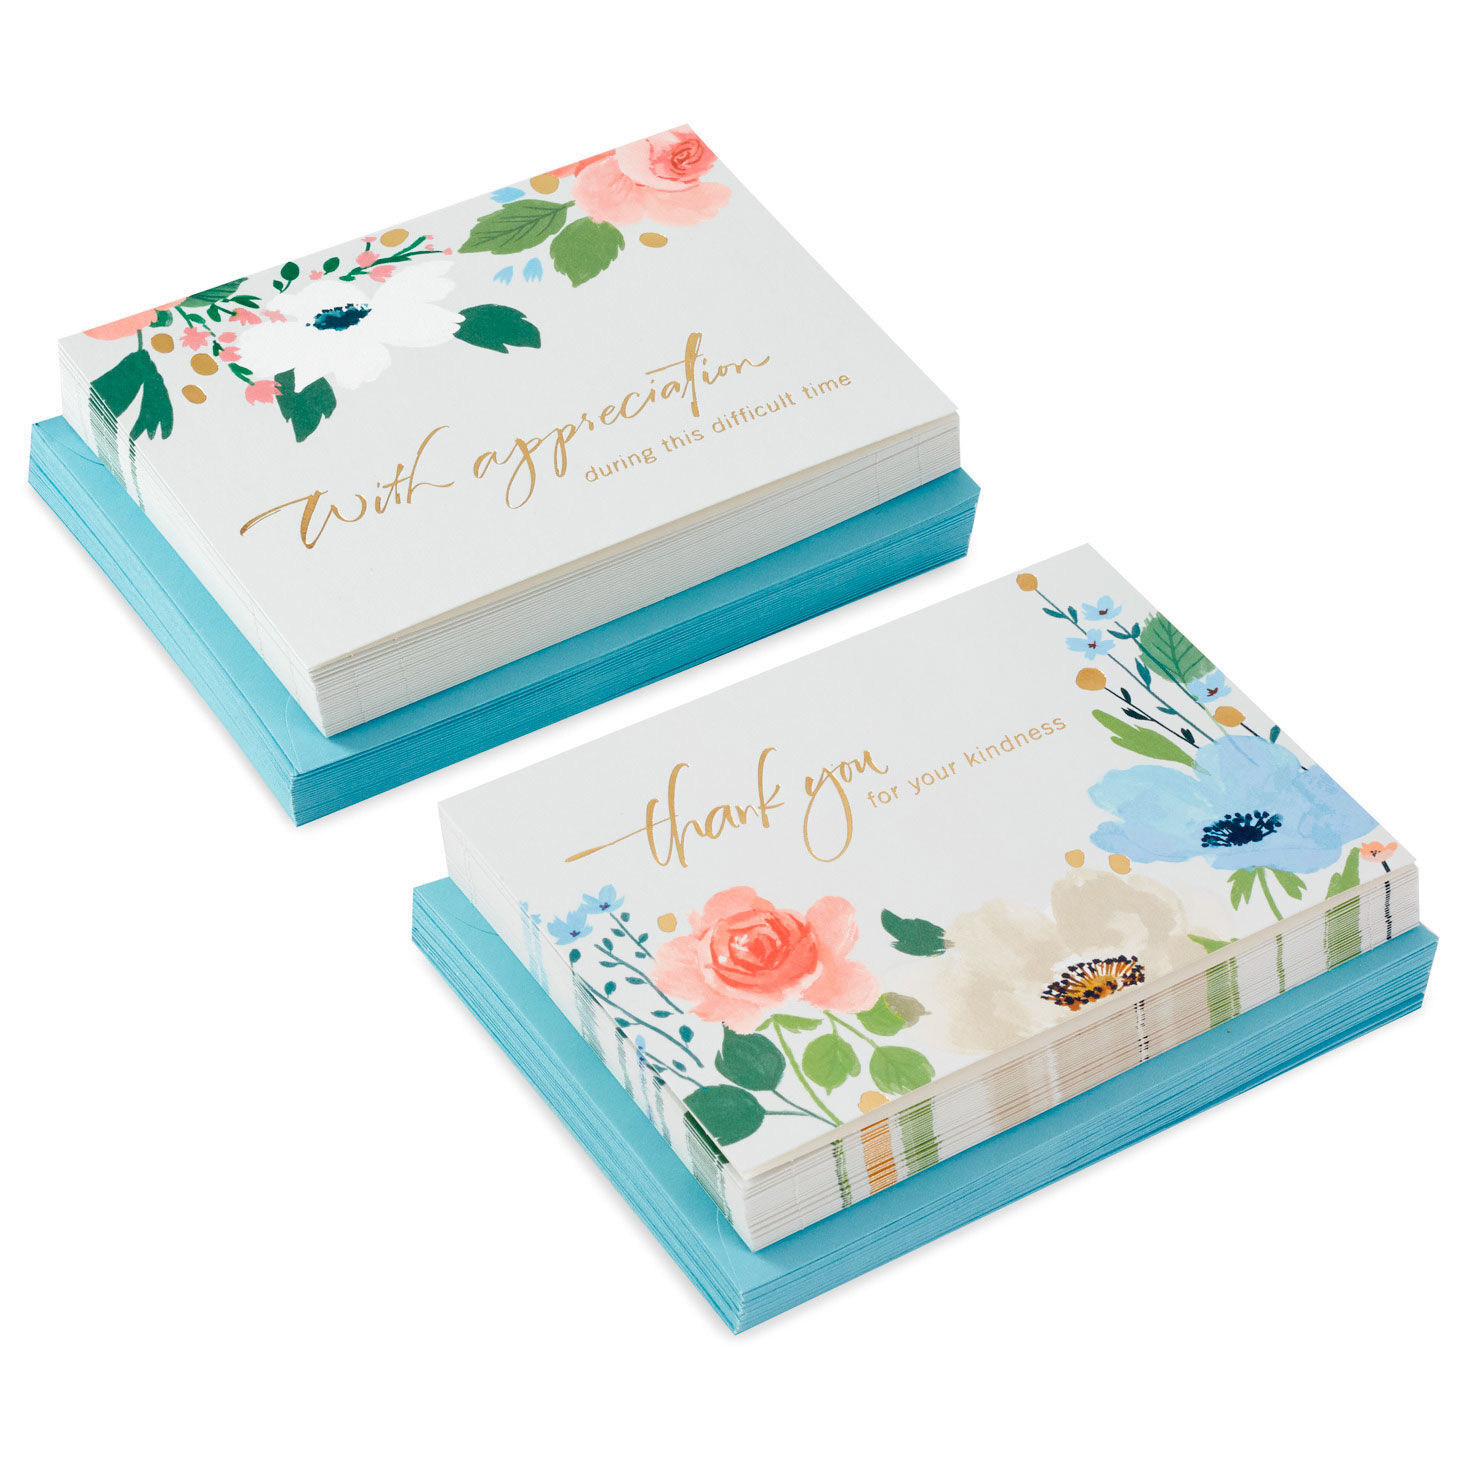 Soft Floral Boxed Blank Sympathy Thank-You Notes, Pack of 50 for only USD 11.99 | Hallmark